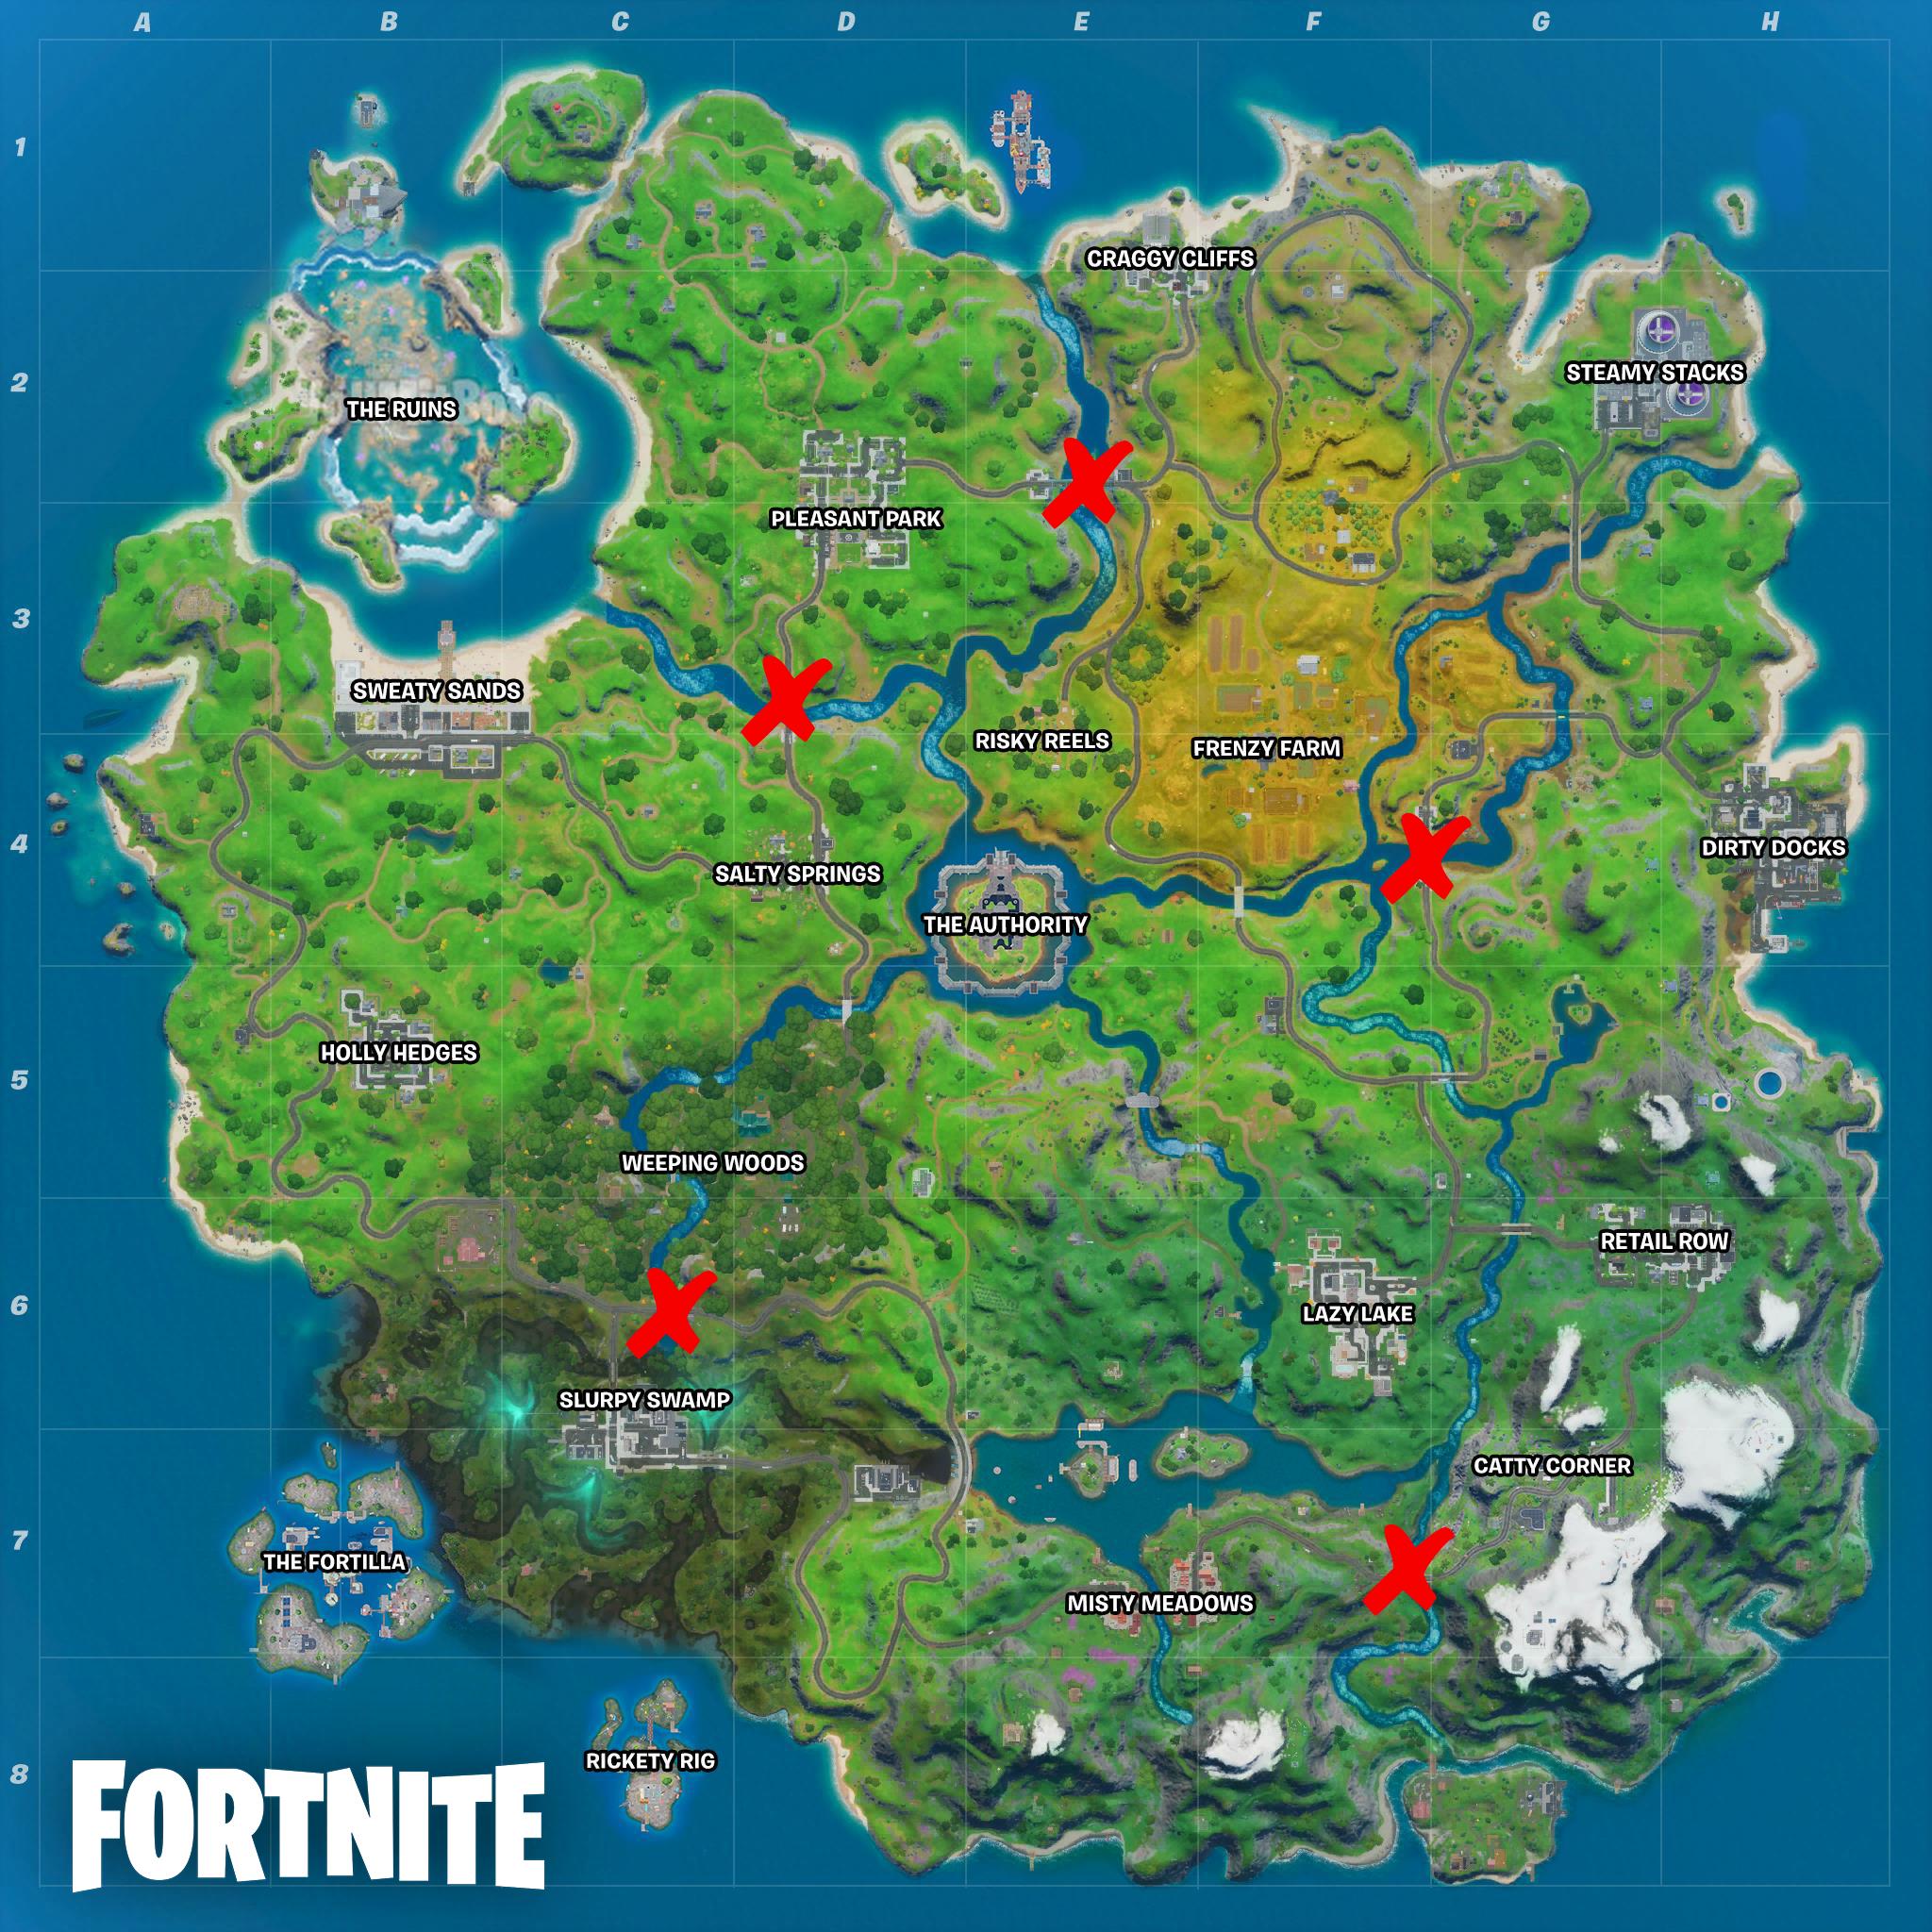 All steel bridge locations marked on fortnite chapter 2 map